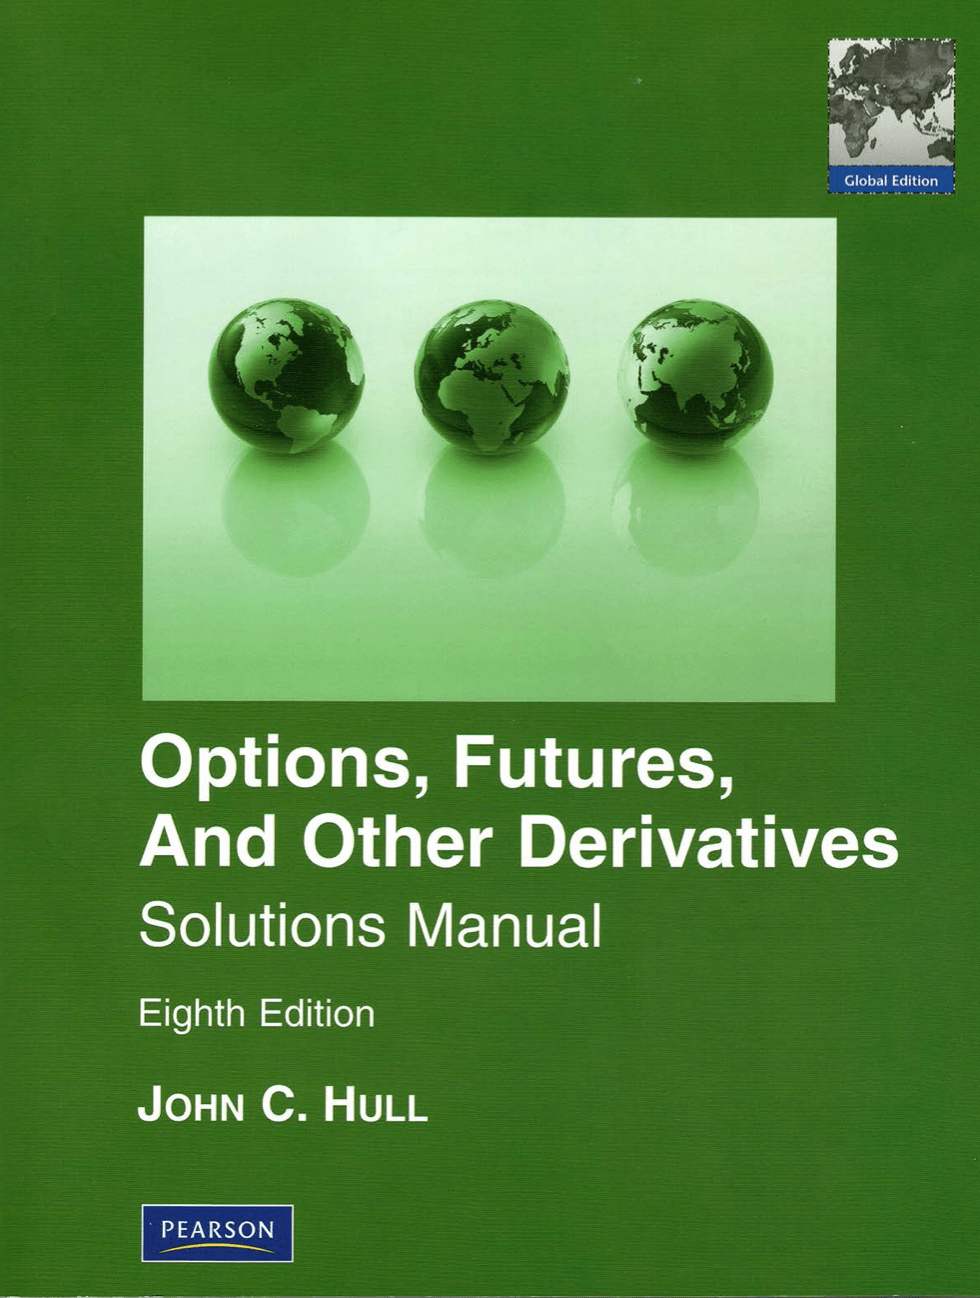 Options, Futures and other Derivatives Solutions Manual on E-Book.business